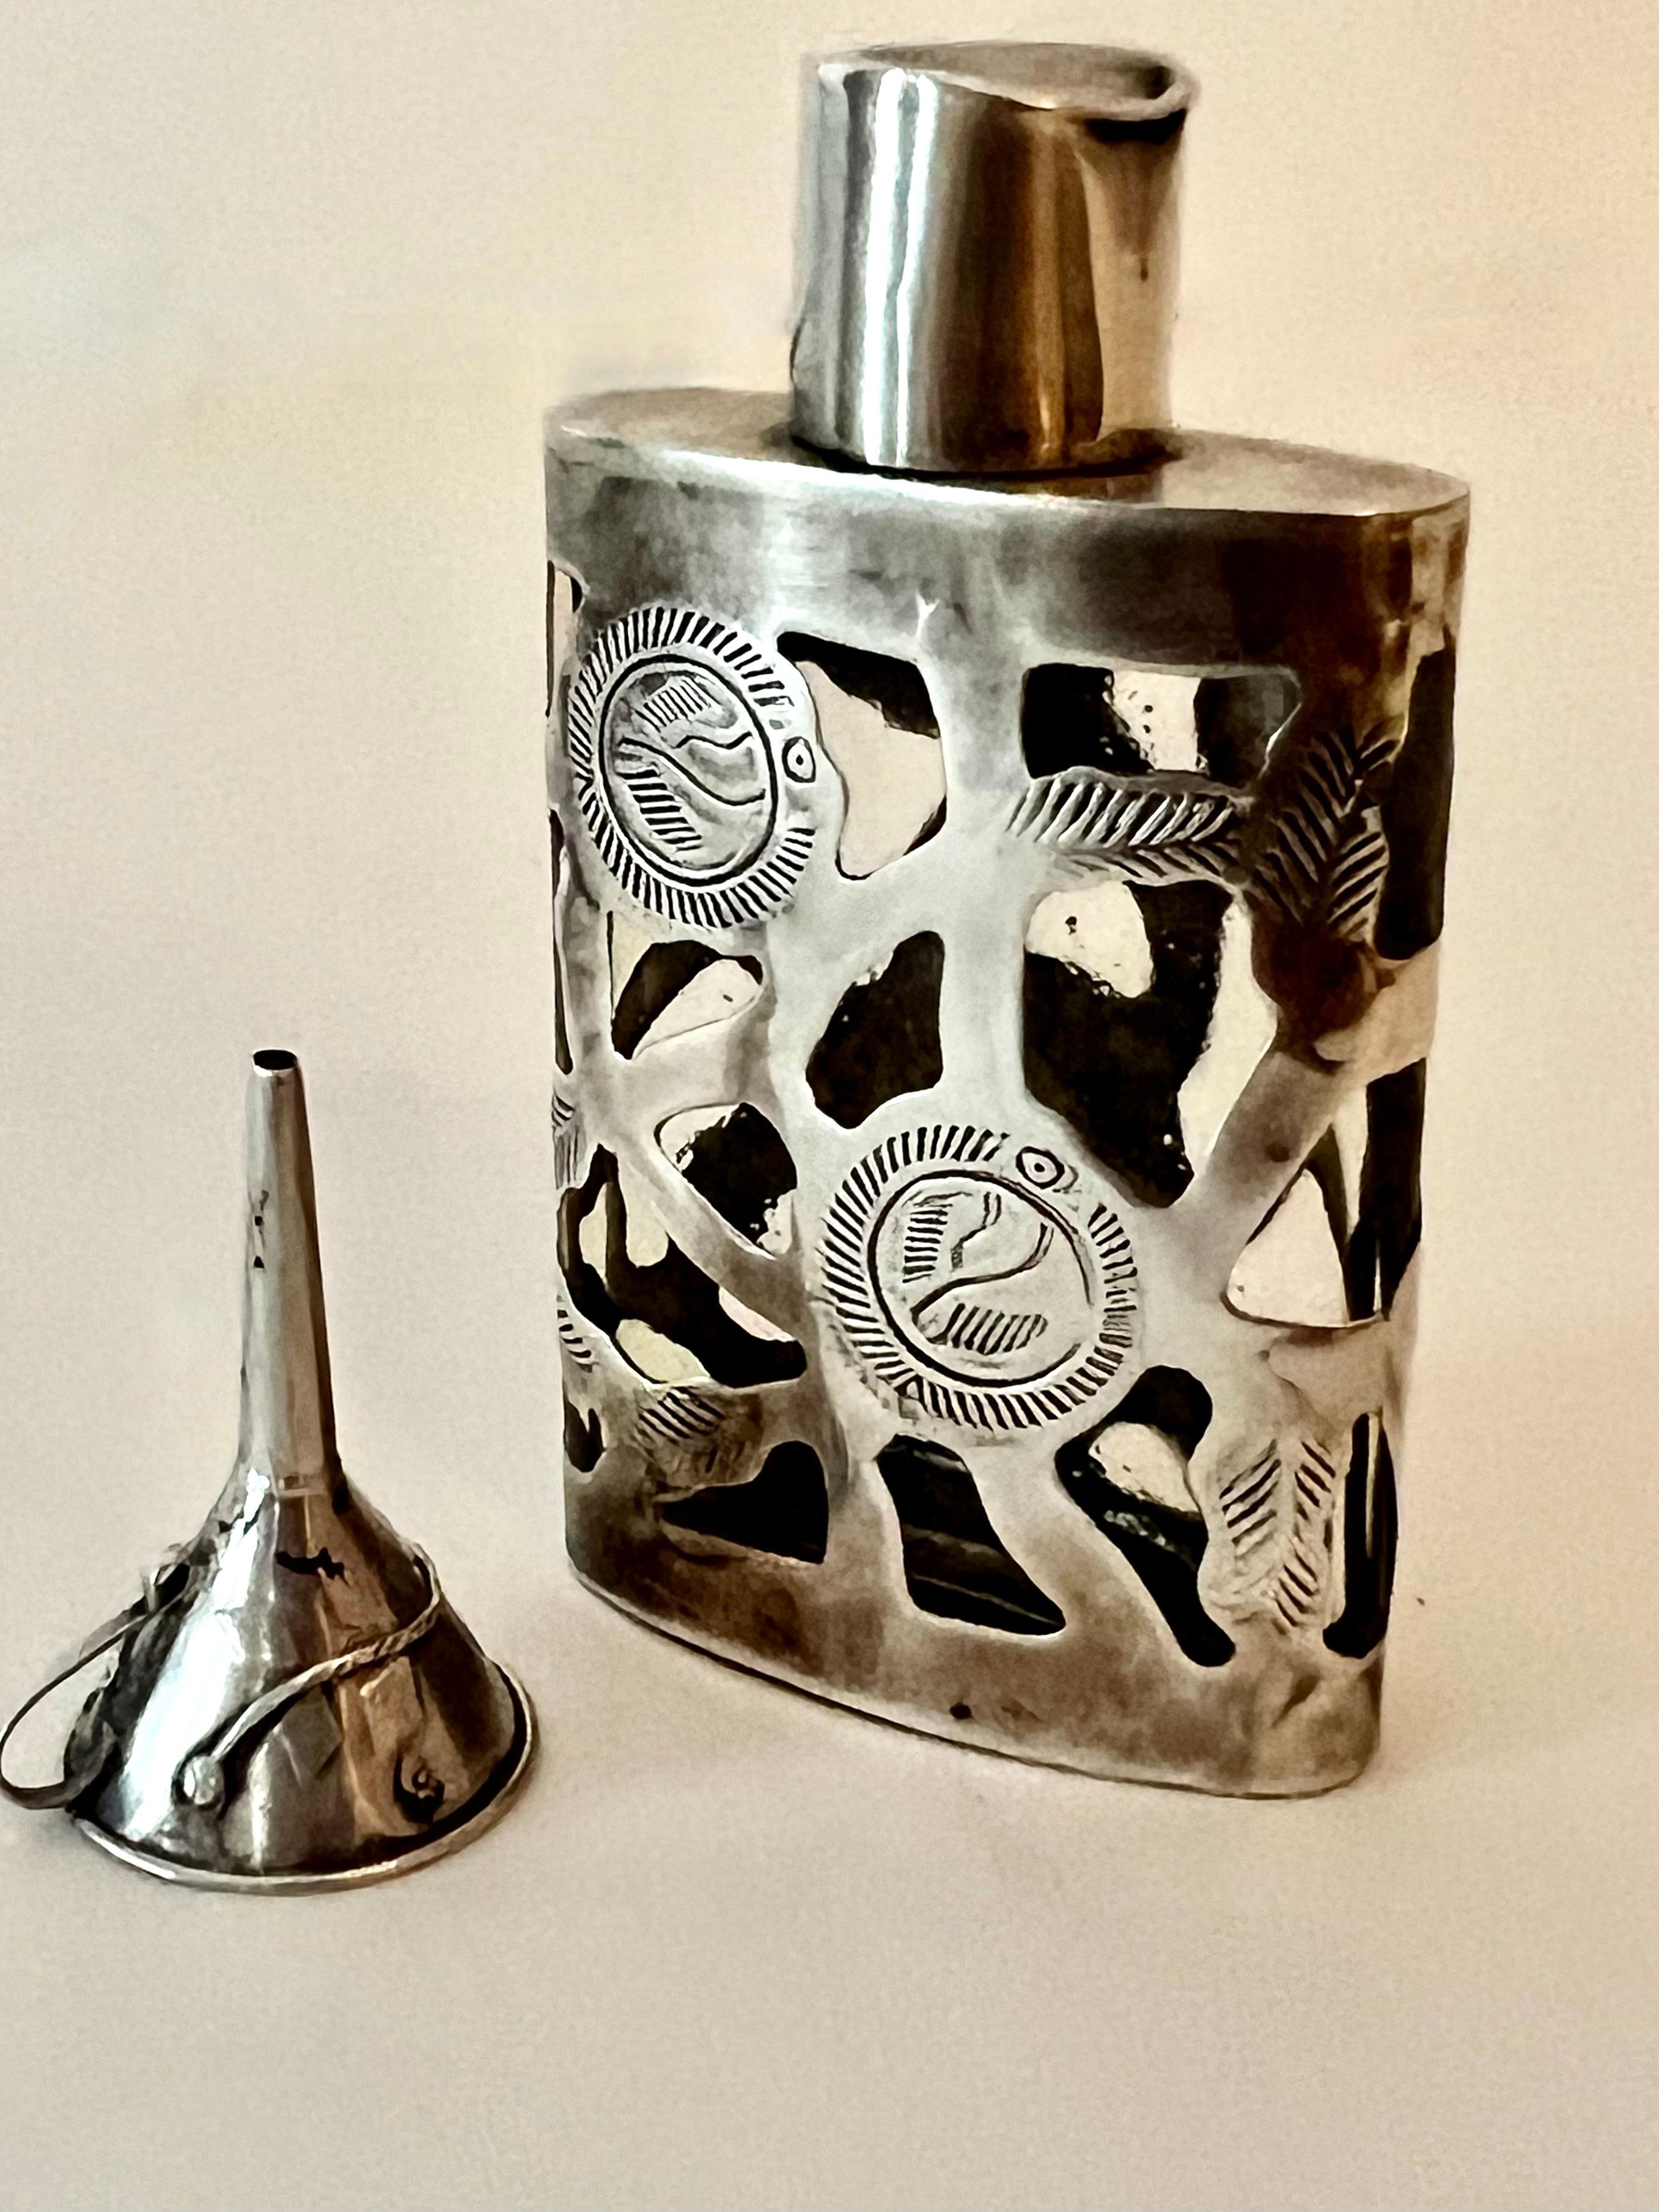 A Mexican Sterling Siver Filagree perfume bottle with Sterling funnel - the duo are quite attractive and ready to use!  great for travel or just to decorate your vanity or dressing table.